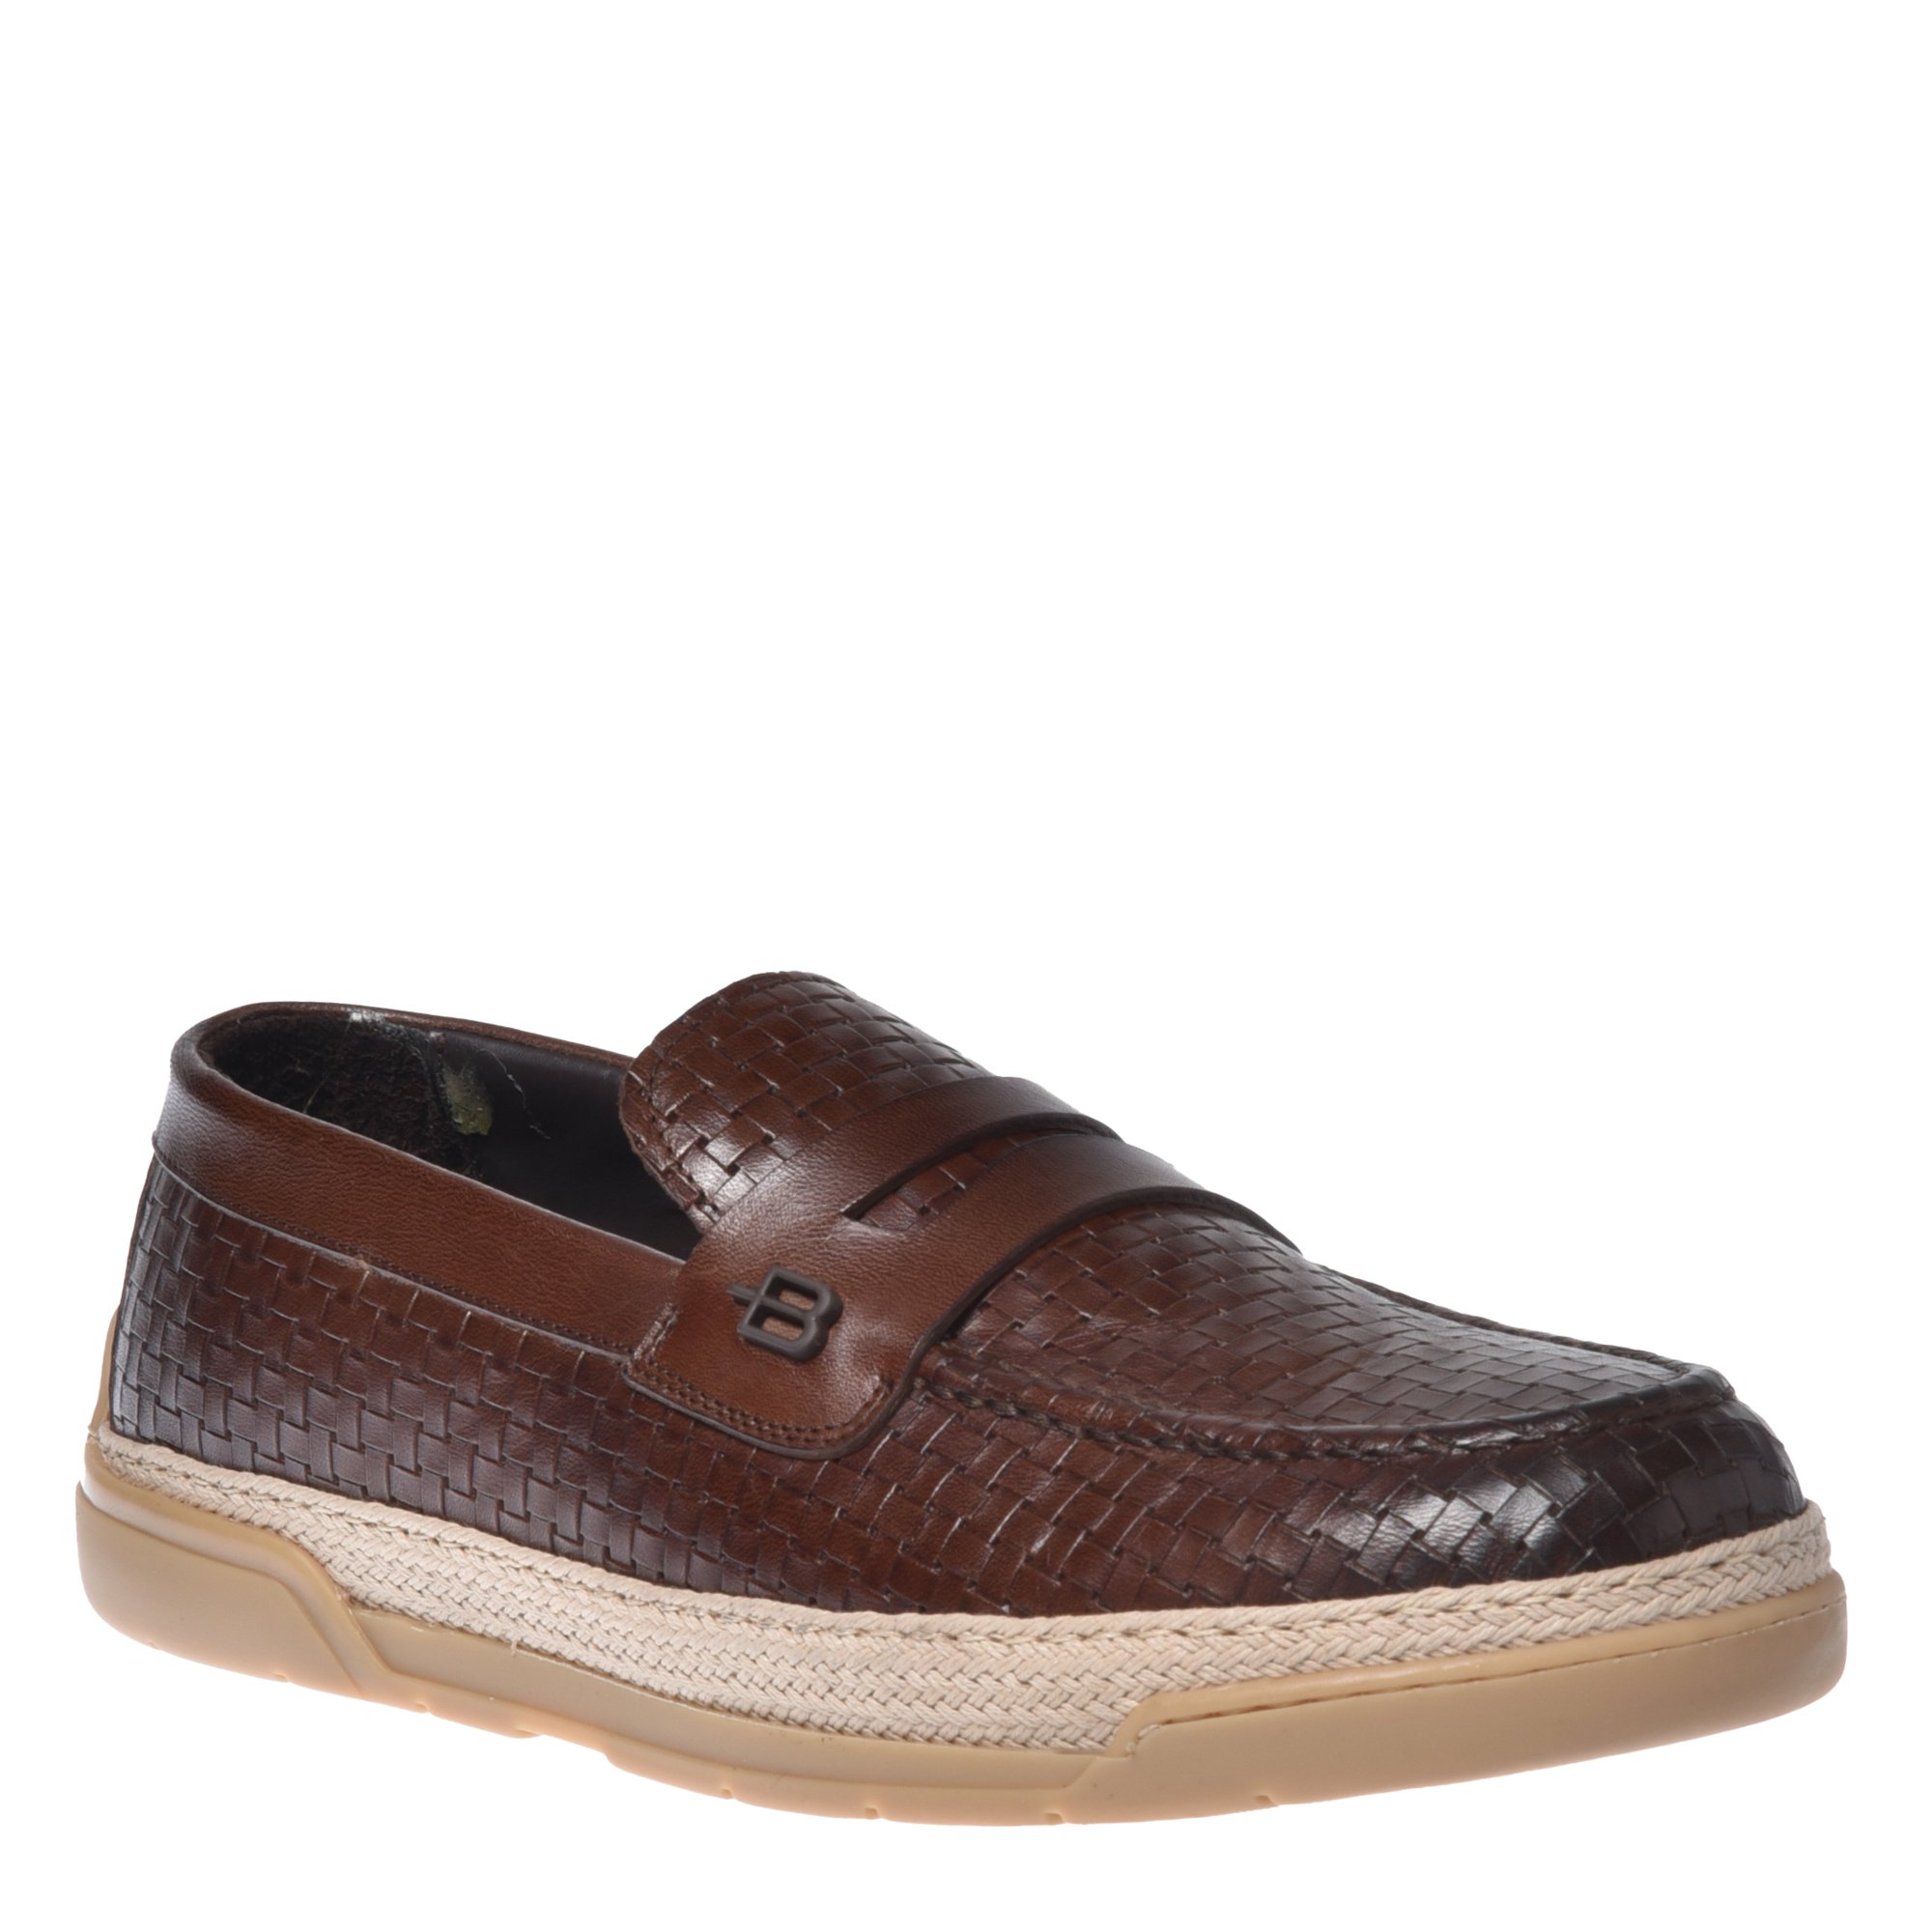 Brown woven print loafer image